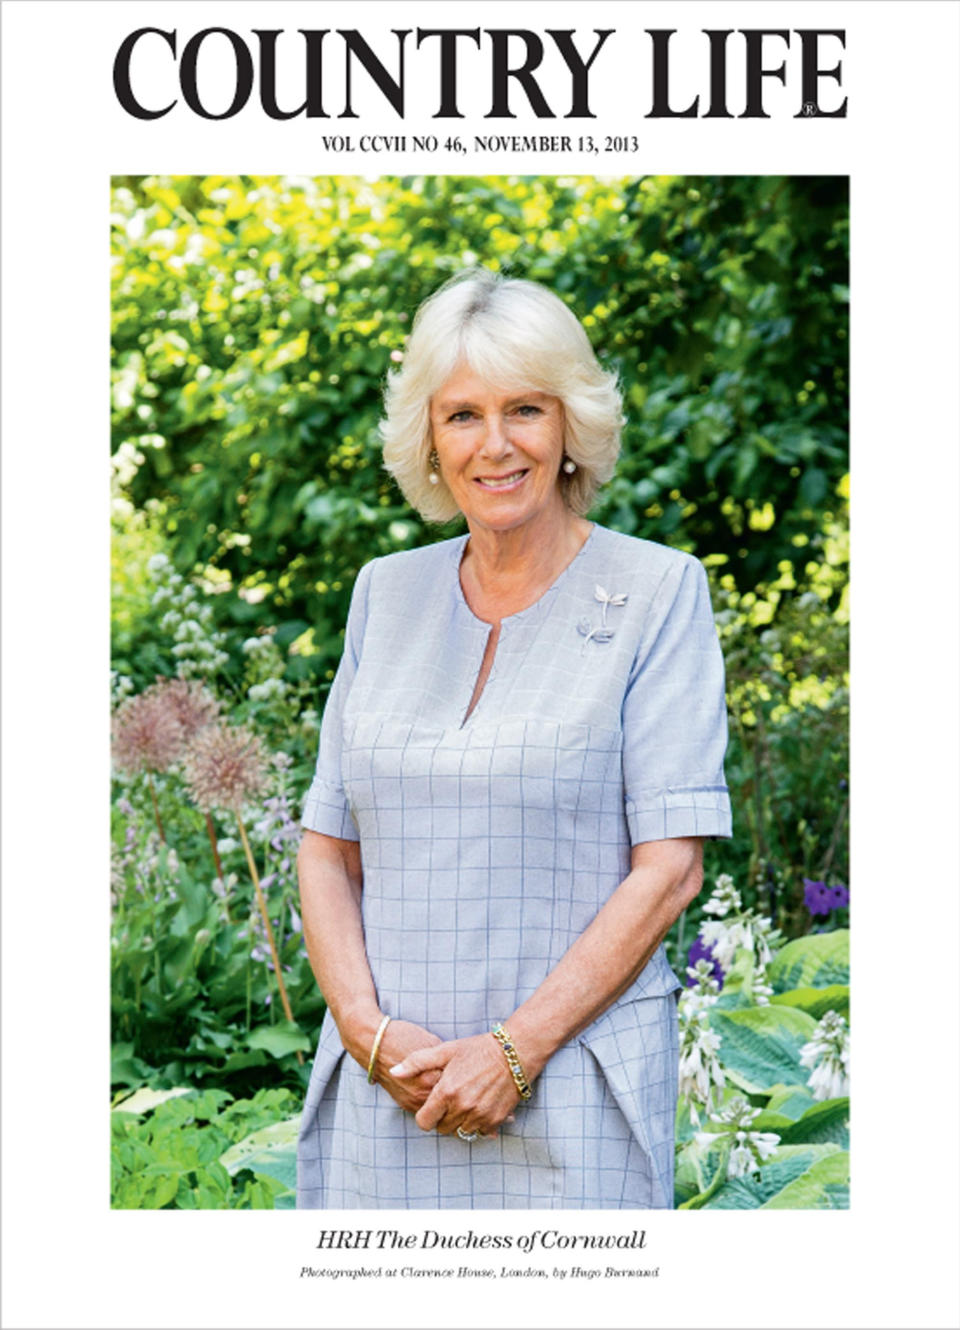 The Duchess of Cornwall previously appeared on a special edition cover in an issue edited by Prince Charles to mark his 65th birthday in 2013. (John Millar/Country Life)